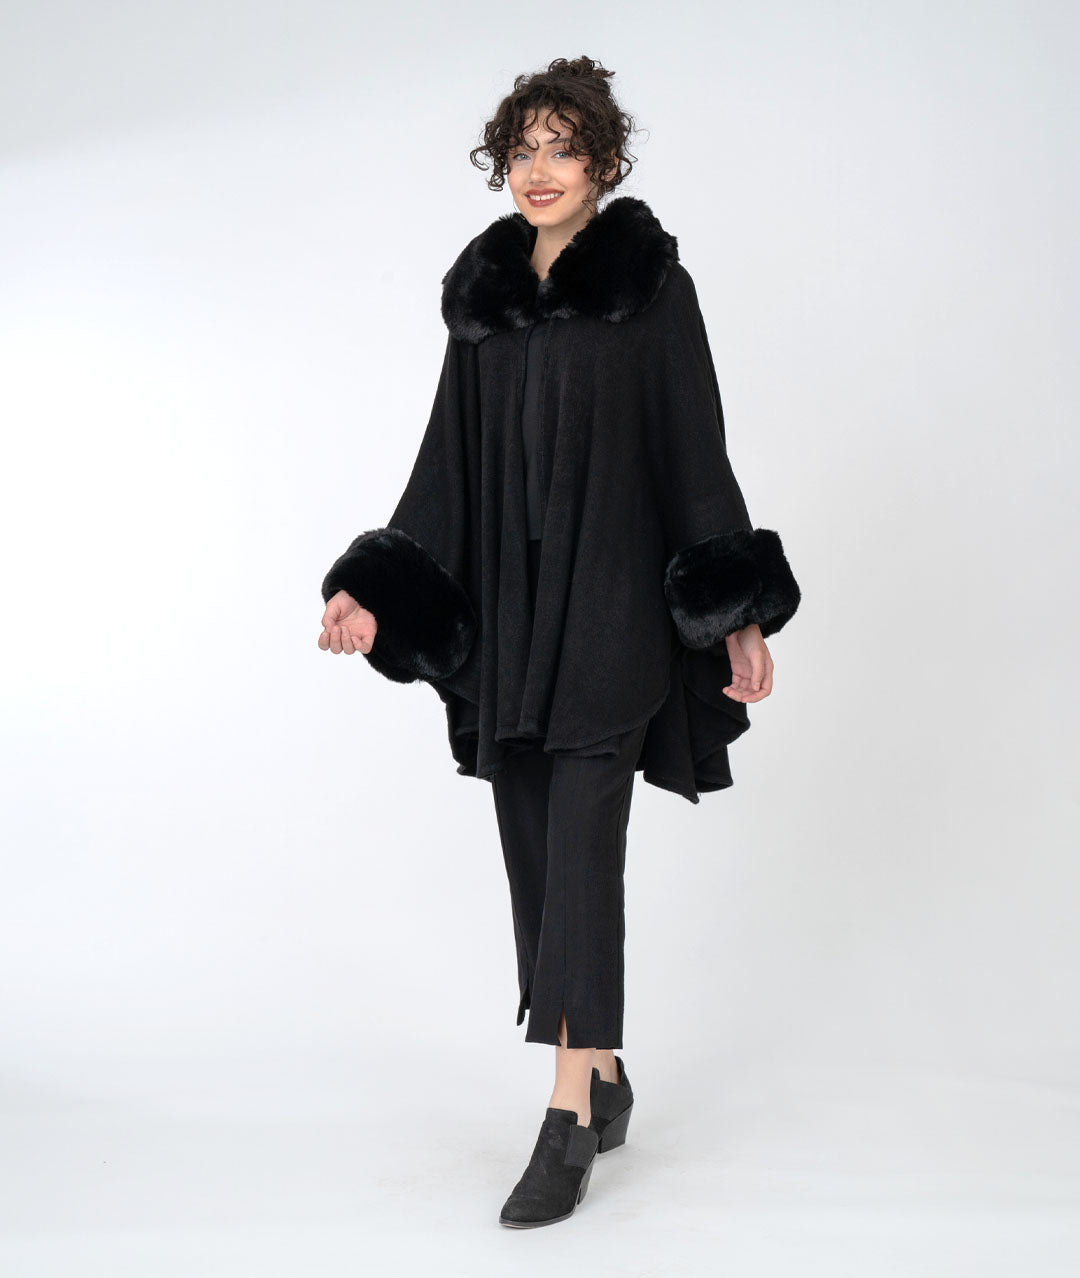 model is wearing all black with a black fur trimmed cape over top